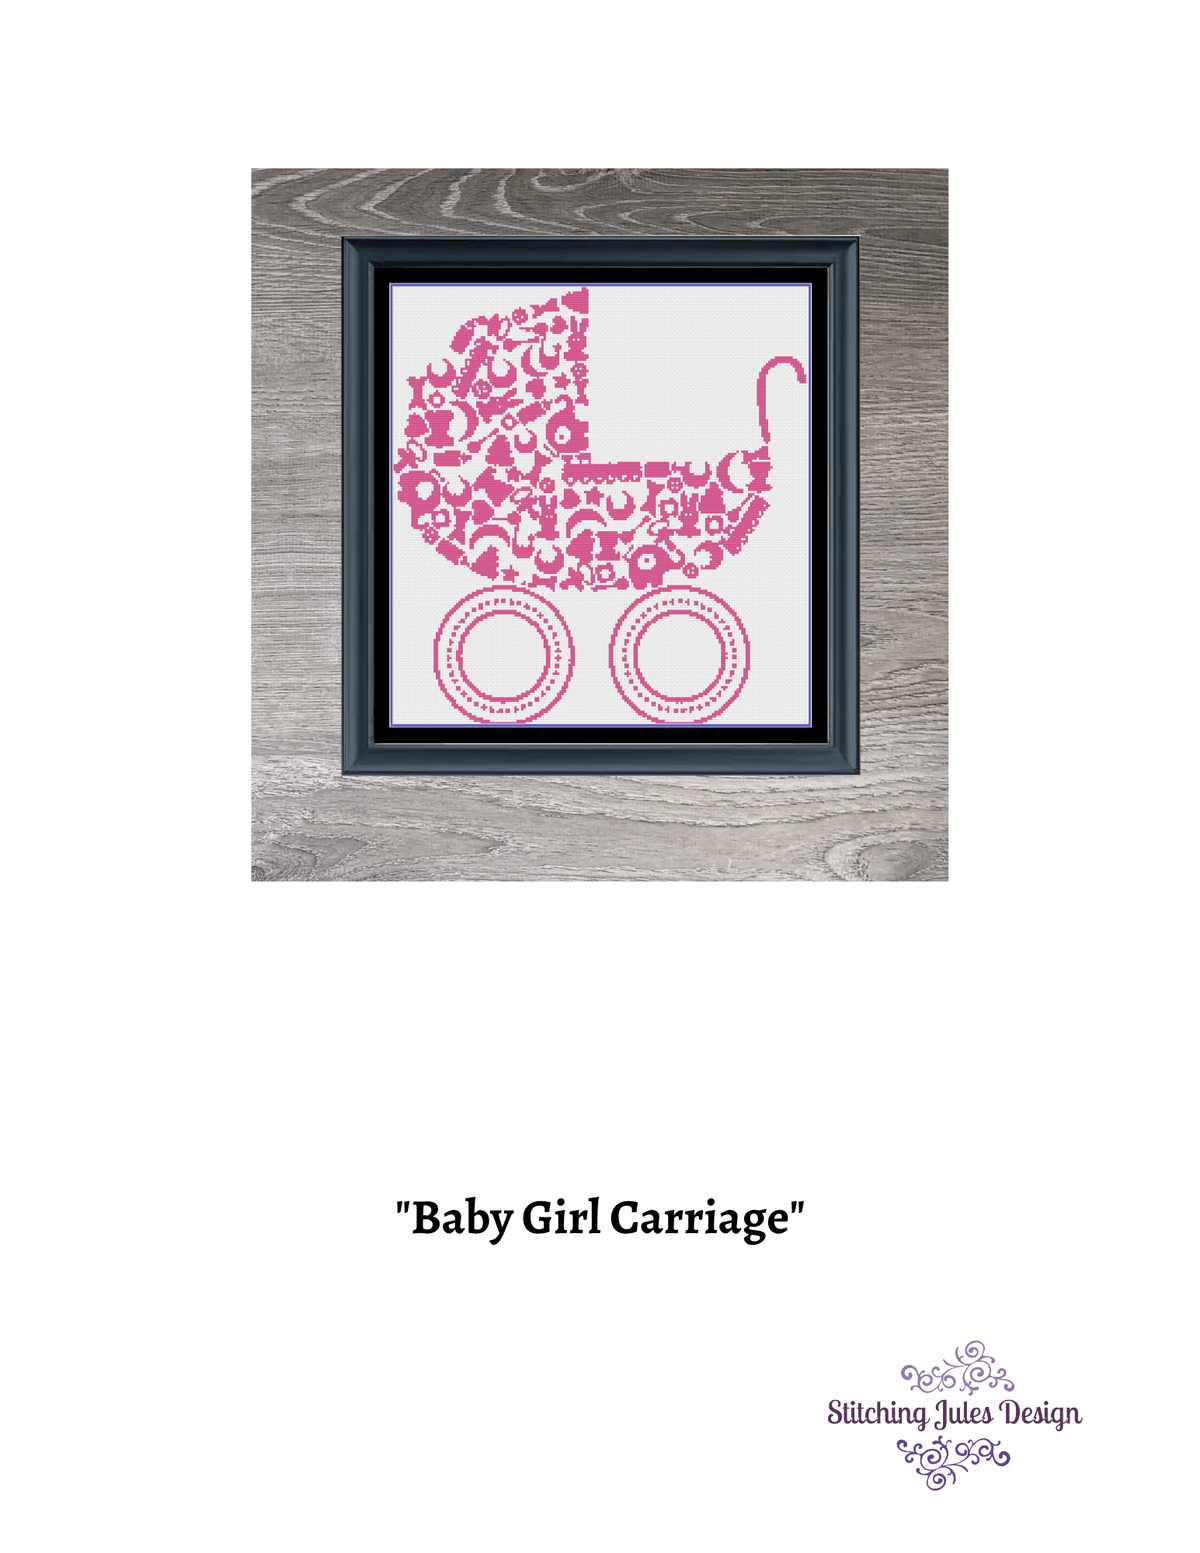 Stitching Jules Design Cross Stitch Pattern Baby Girl Carriage Daughter Monochrome Cross Stitch Needlepoint Embroidery Pattern - Instant Download - Pattern Keeper Ready